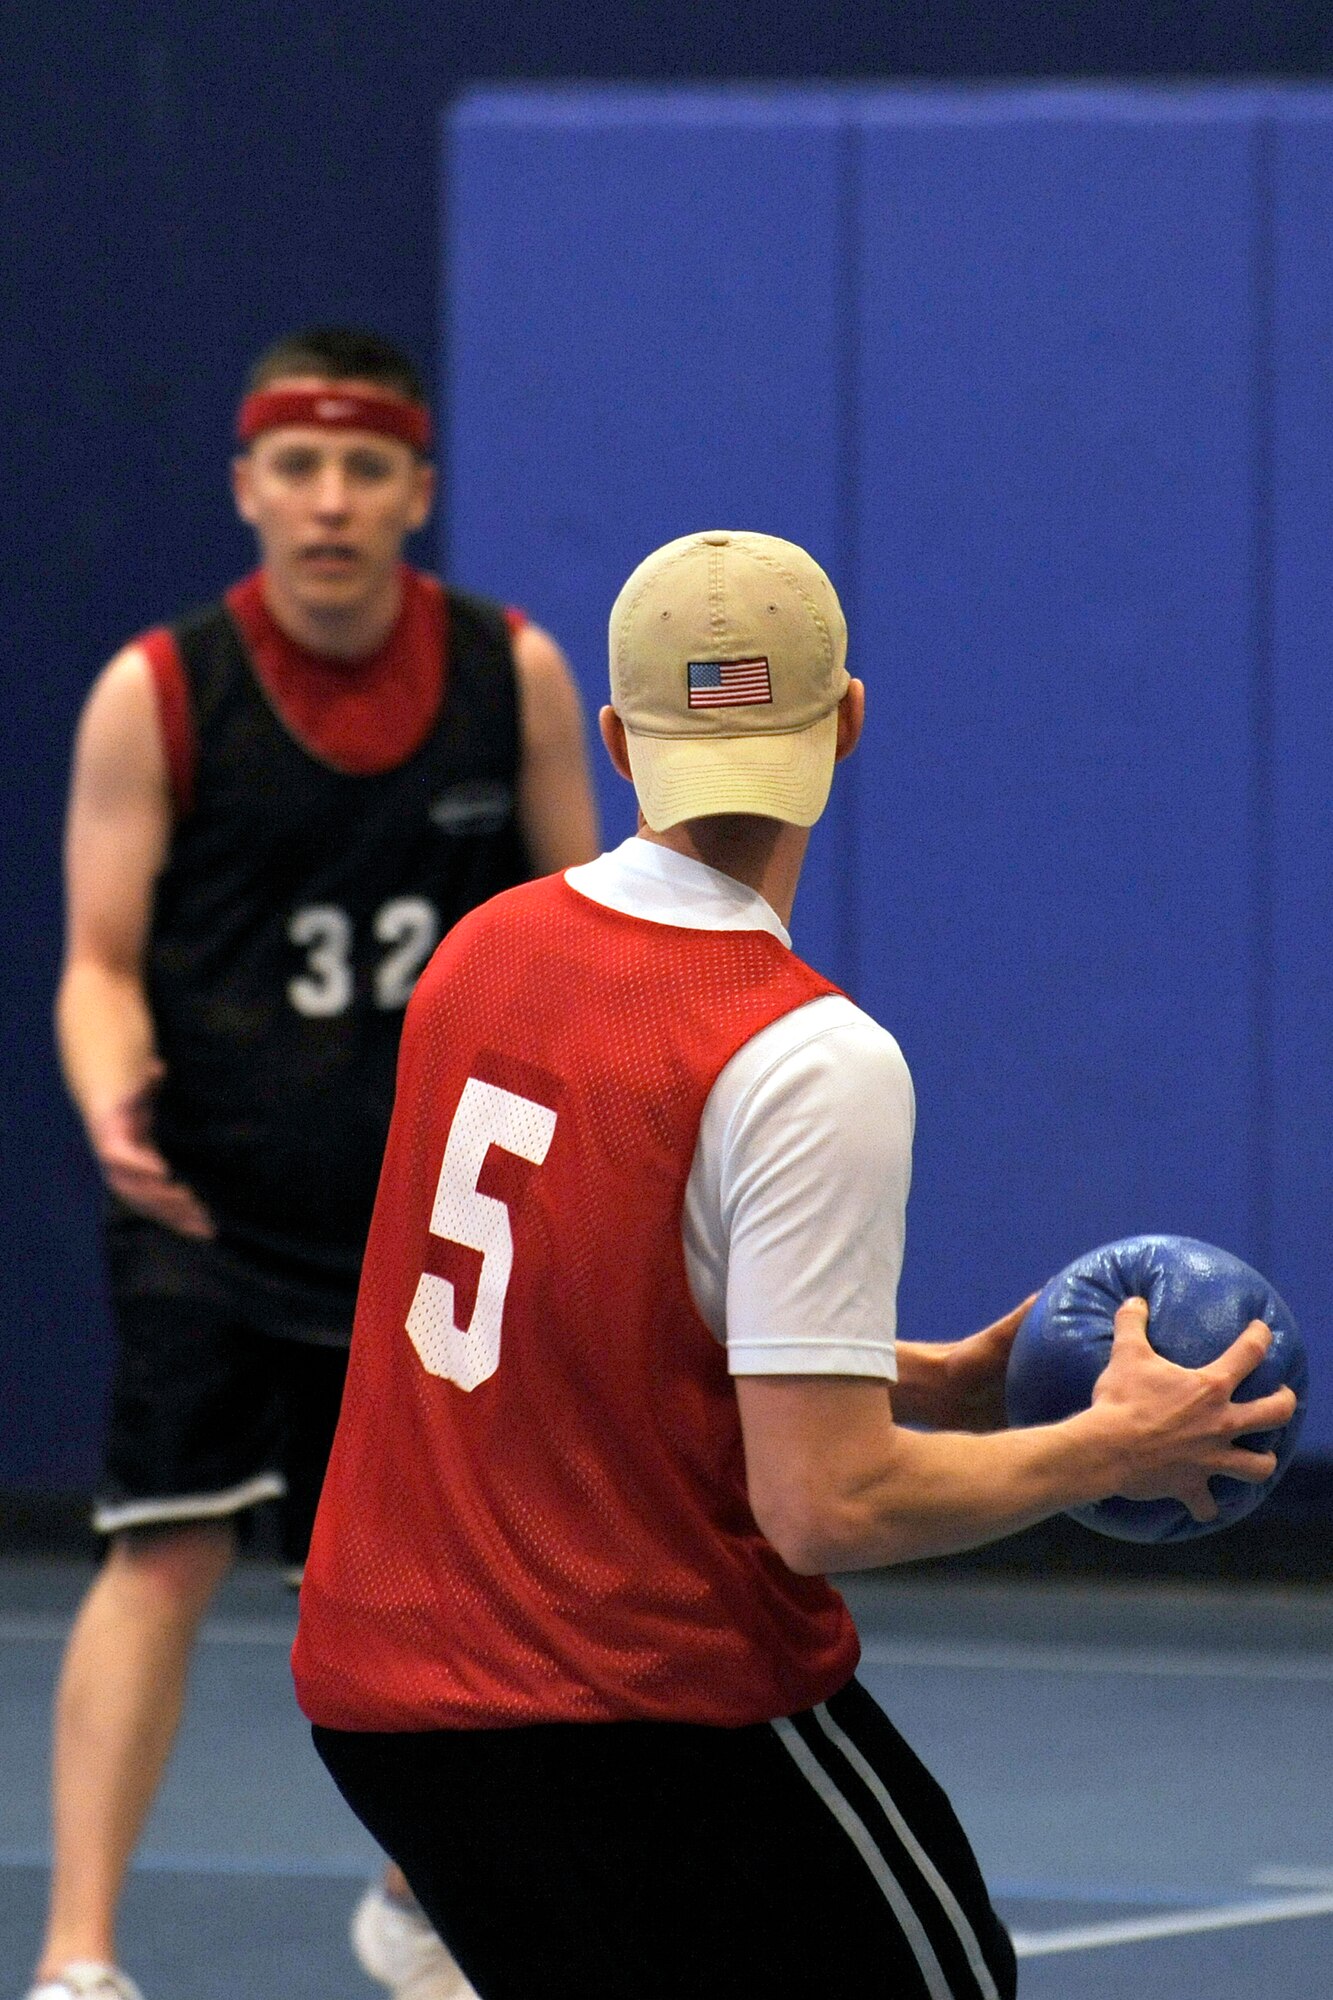 Senior Airman Samual Weaver, 50th Space Communications Squadron, gets ready to launch a dodgeball at 1st. Lt. Doug Bates, 50th Mission Support Group. The two were on opposing teams throughout the 40-hour dodgeball marathon. (U.S. Air Force photo/Bill Evans)